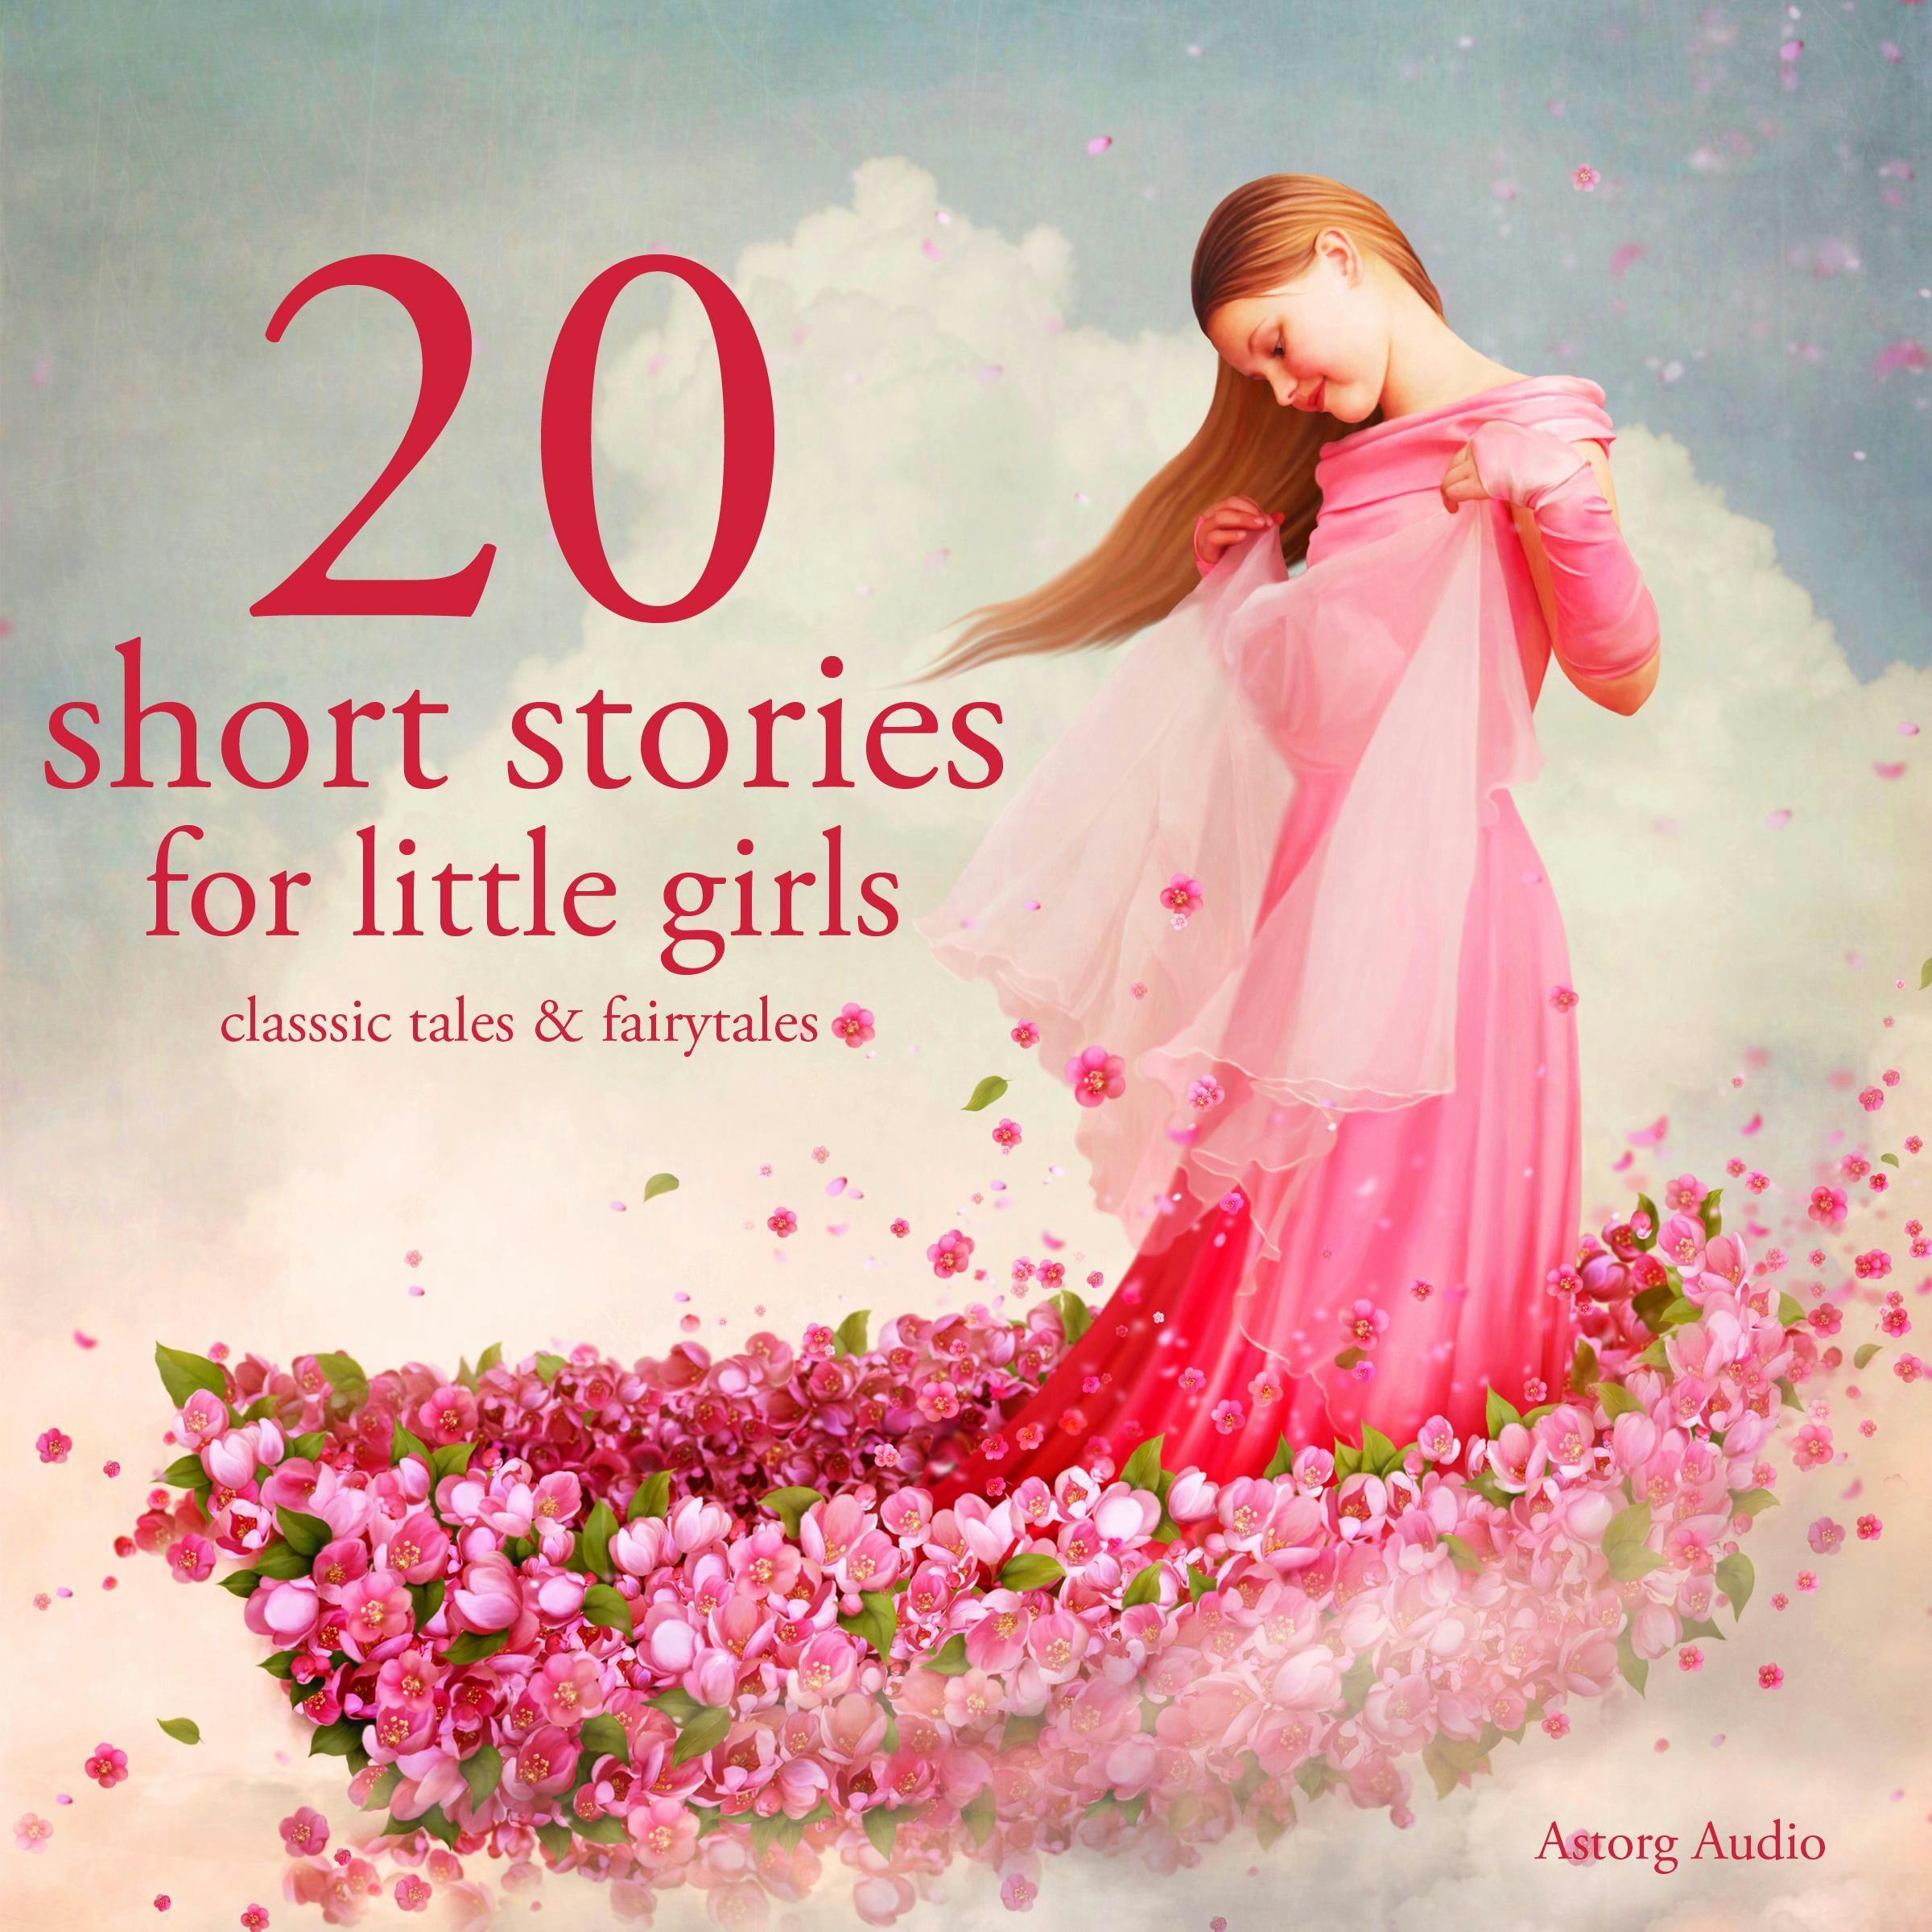 20 Short Stories For Little Girls: Best of stories and tales for children - undefined